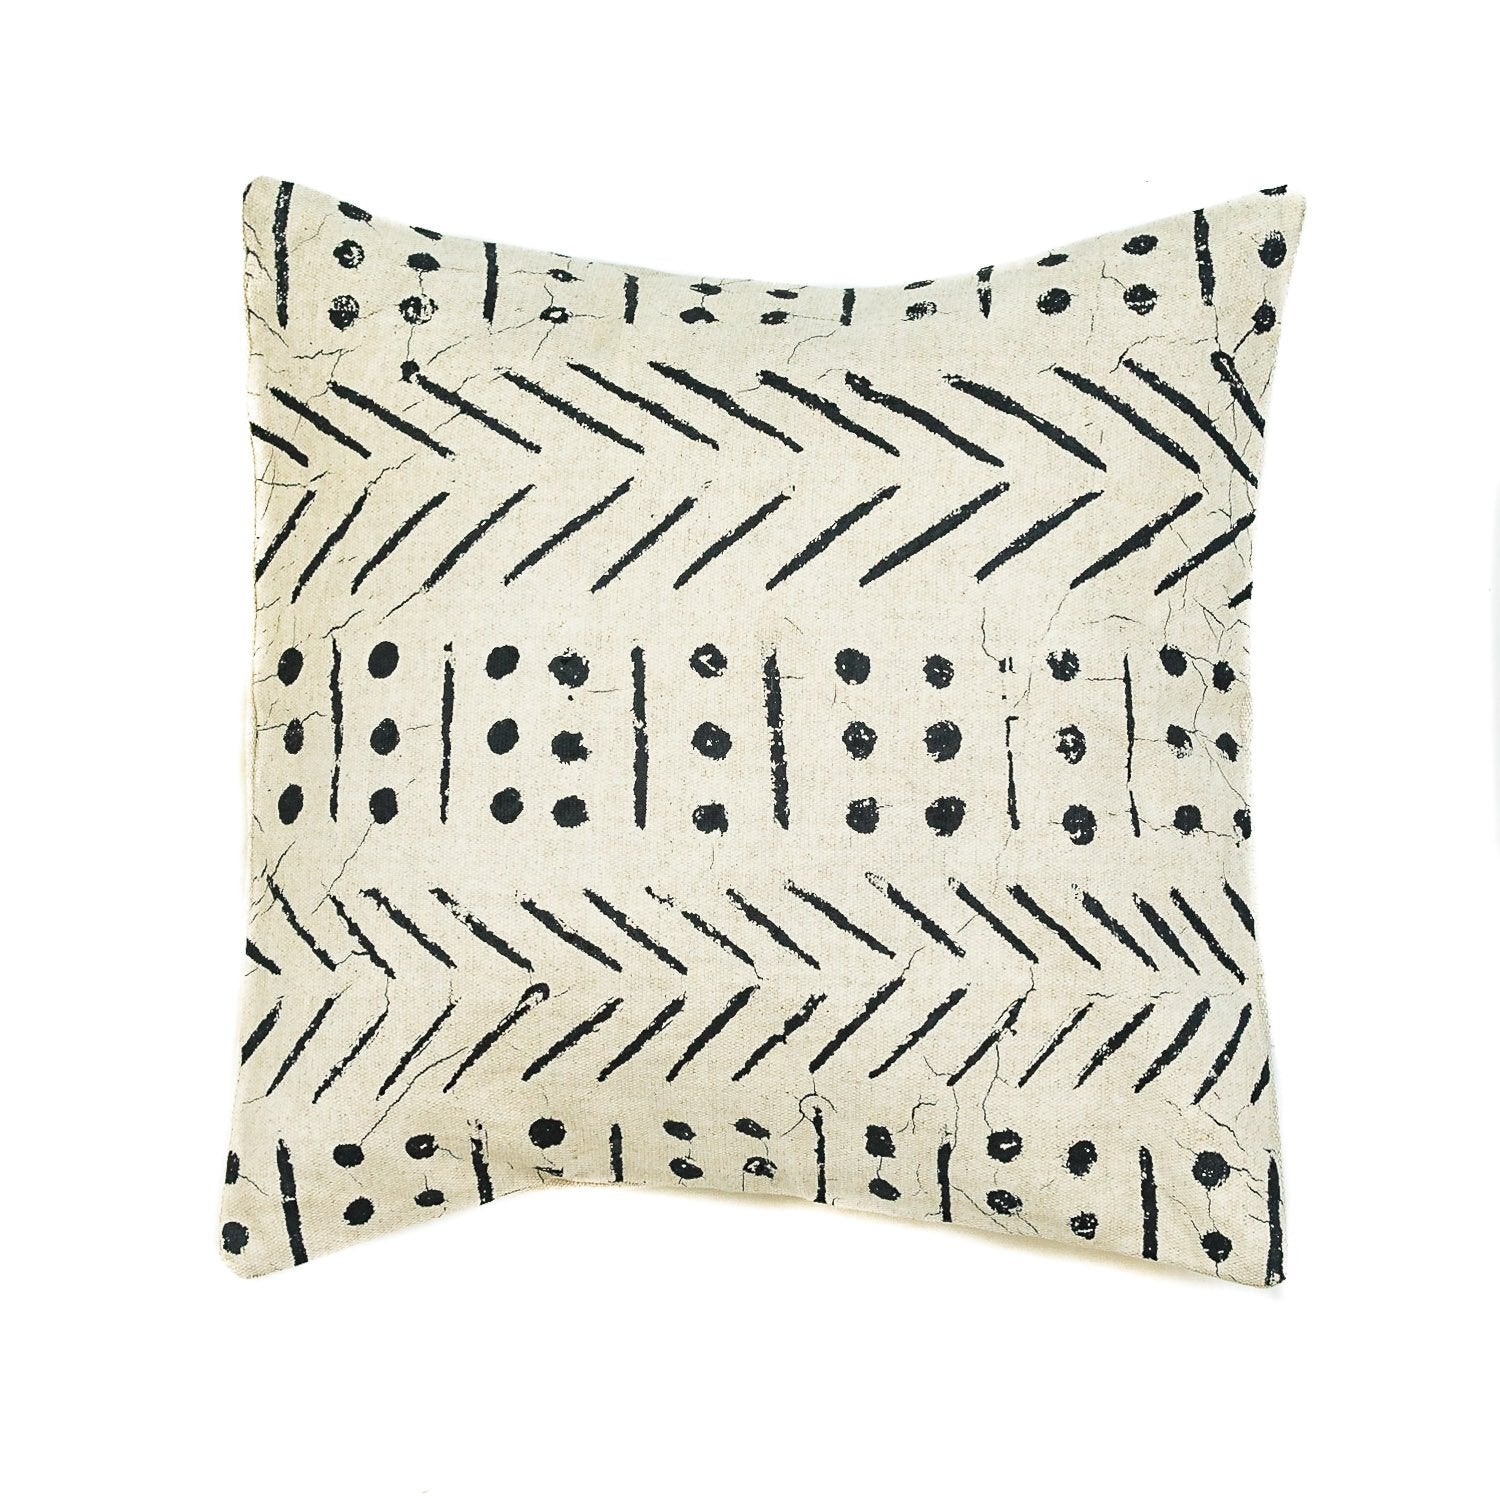 IMPERFECT SALE: Matika Linen Black Cushion Cover - Hand Painted by TRIBAL TEXTILES - Handcrafted Home Decor Interiors - African Made